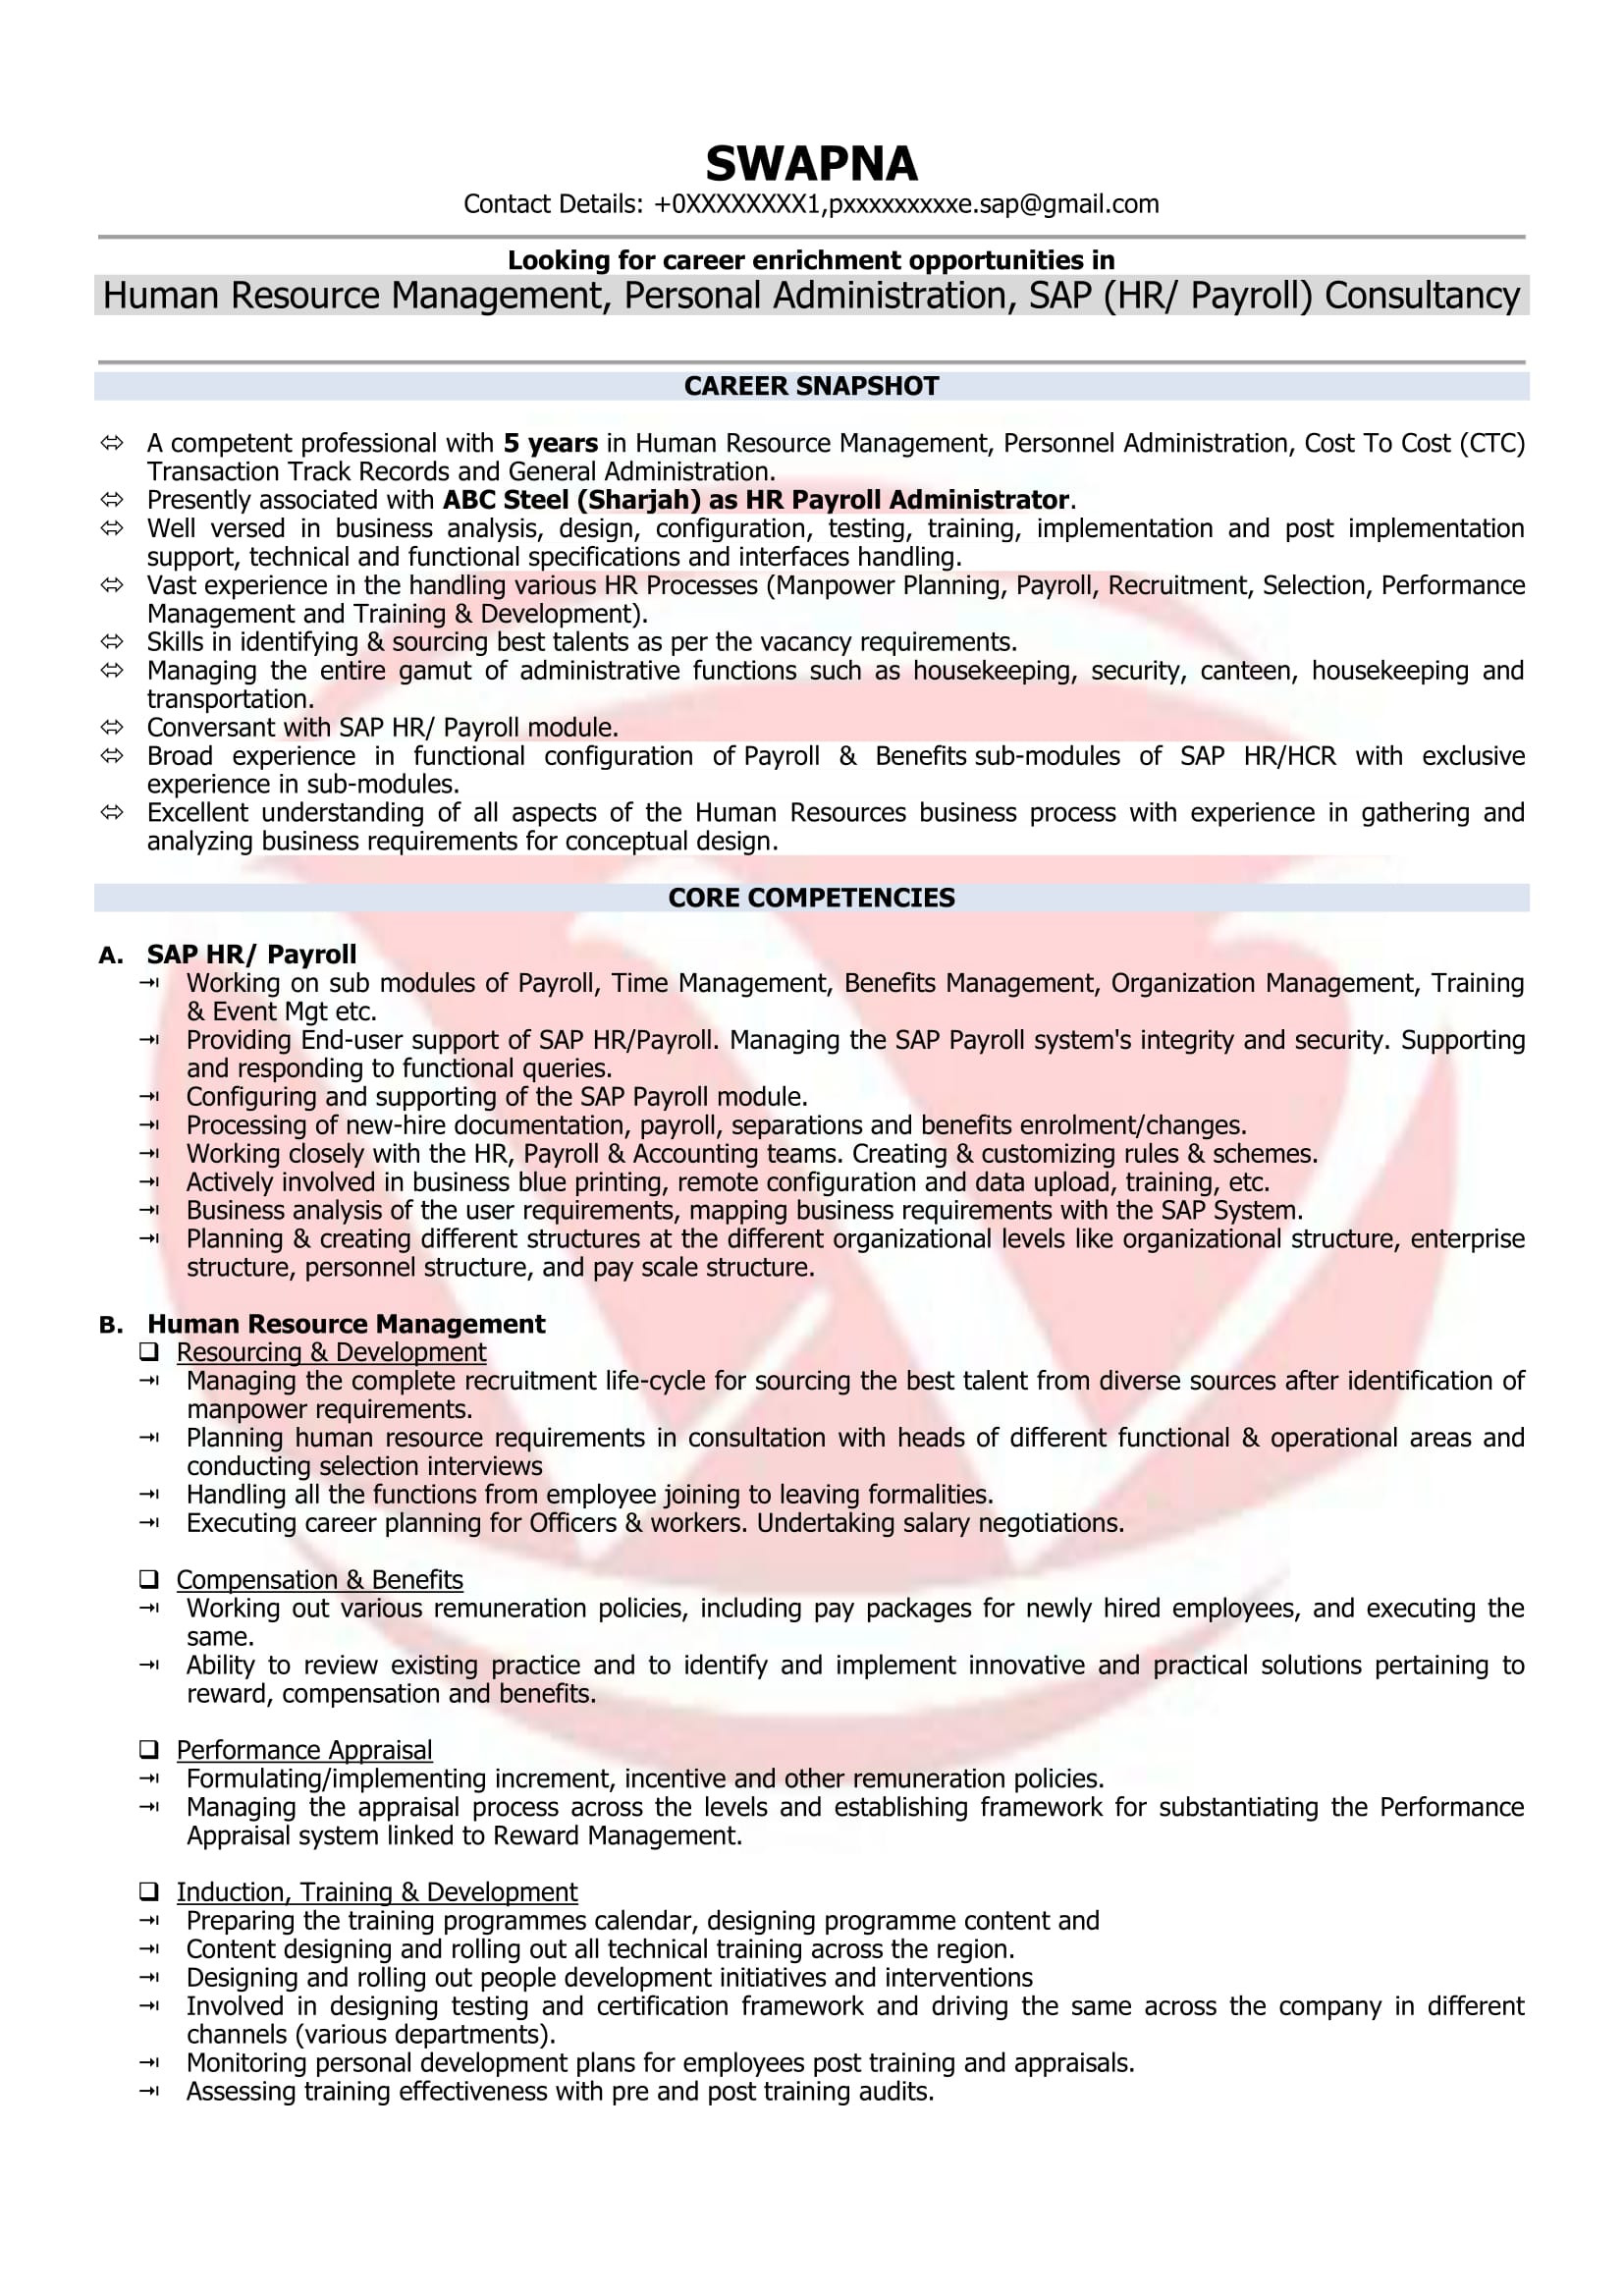 Hr Executive Resume Sample In India Hr Executive Sample Resumes, Download Resume format Templates!